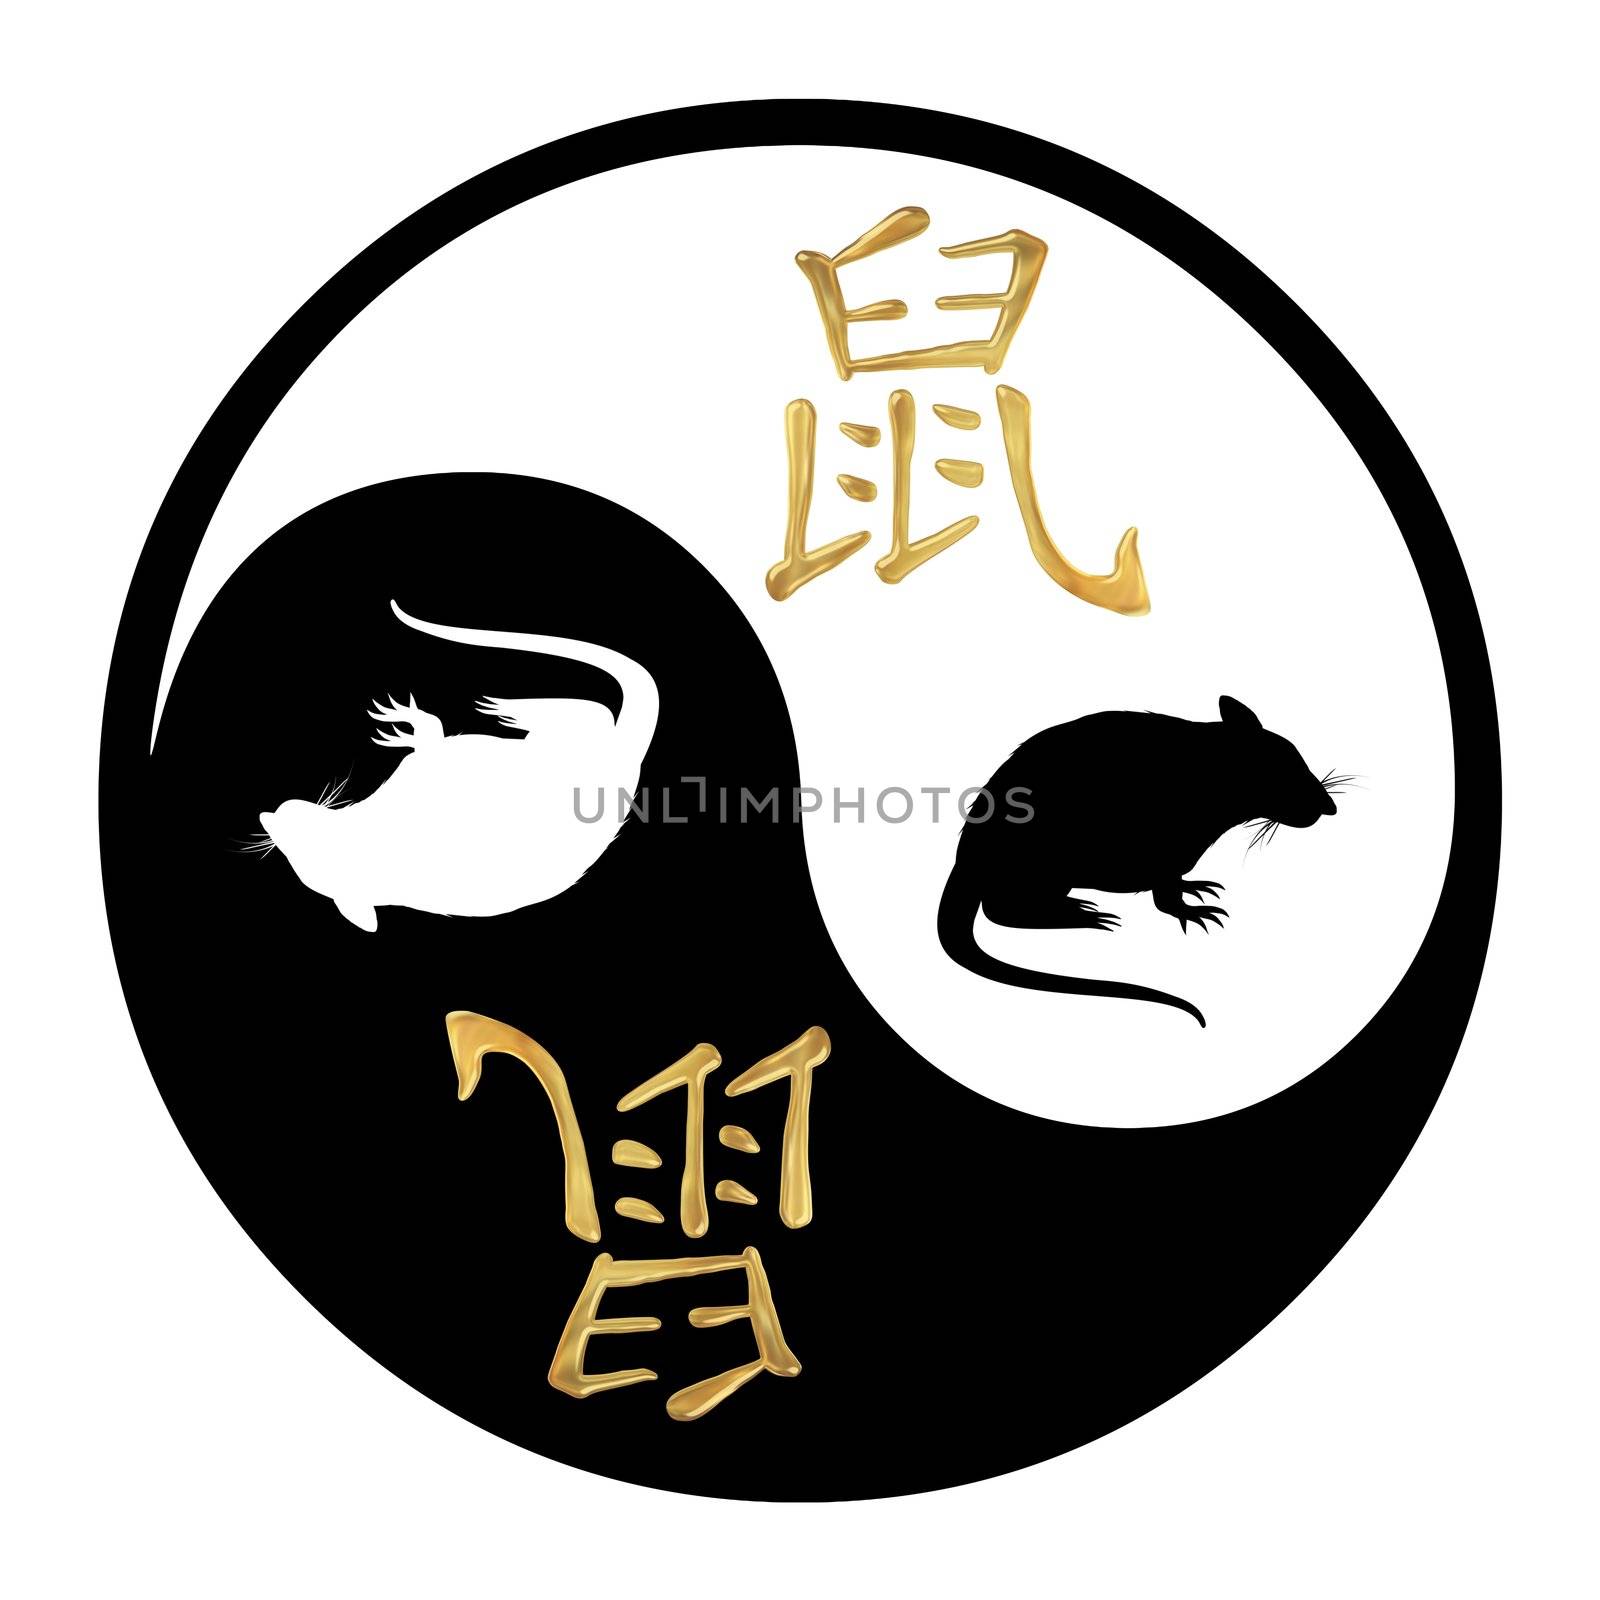 Yin Yang symbol with Chinese text and image of a Rat